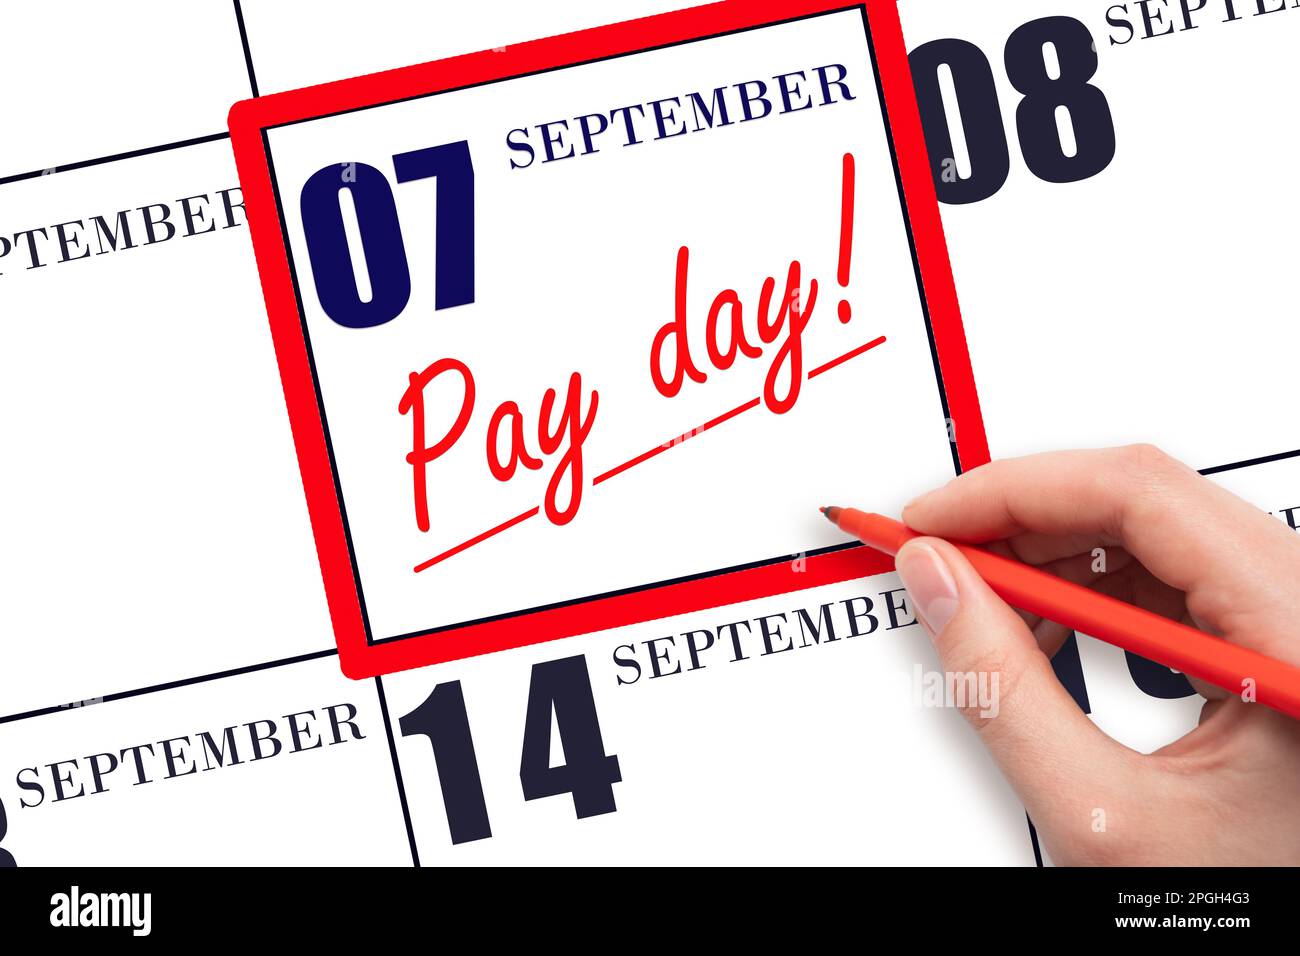 7th day of September. Hand writing text PAY DATE on calendar date September 7 and underline it. Payment due date. Reminder concept of payment. Autumn Stock Photo